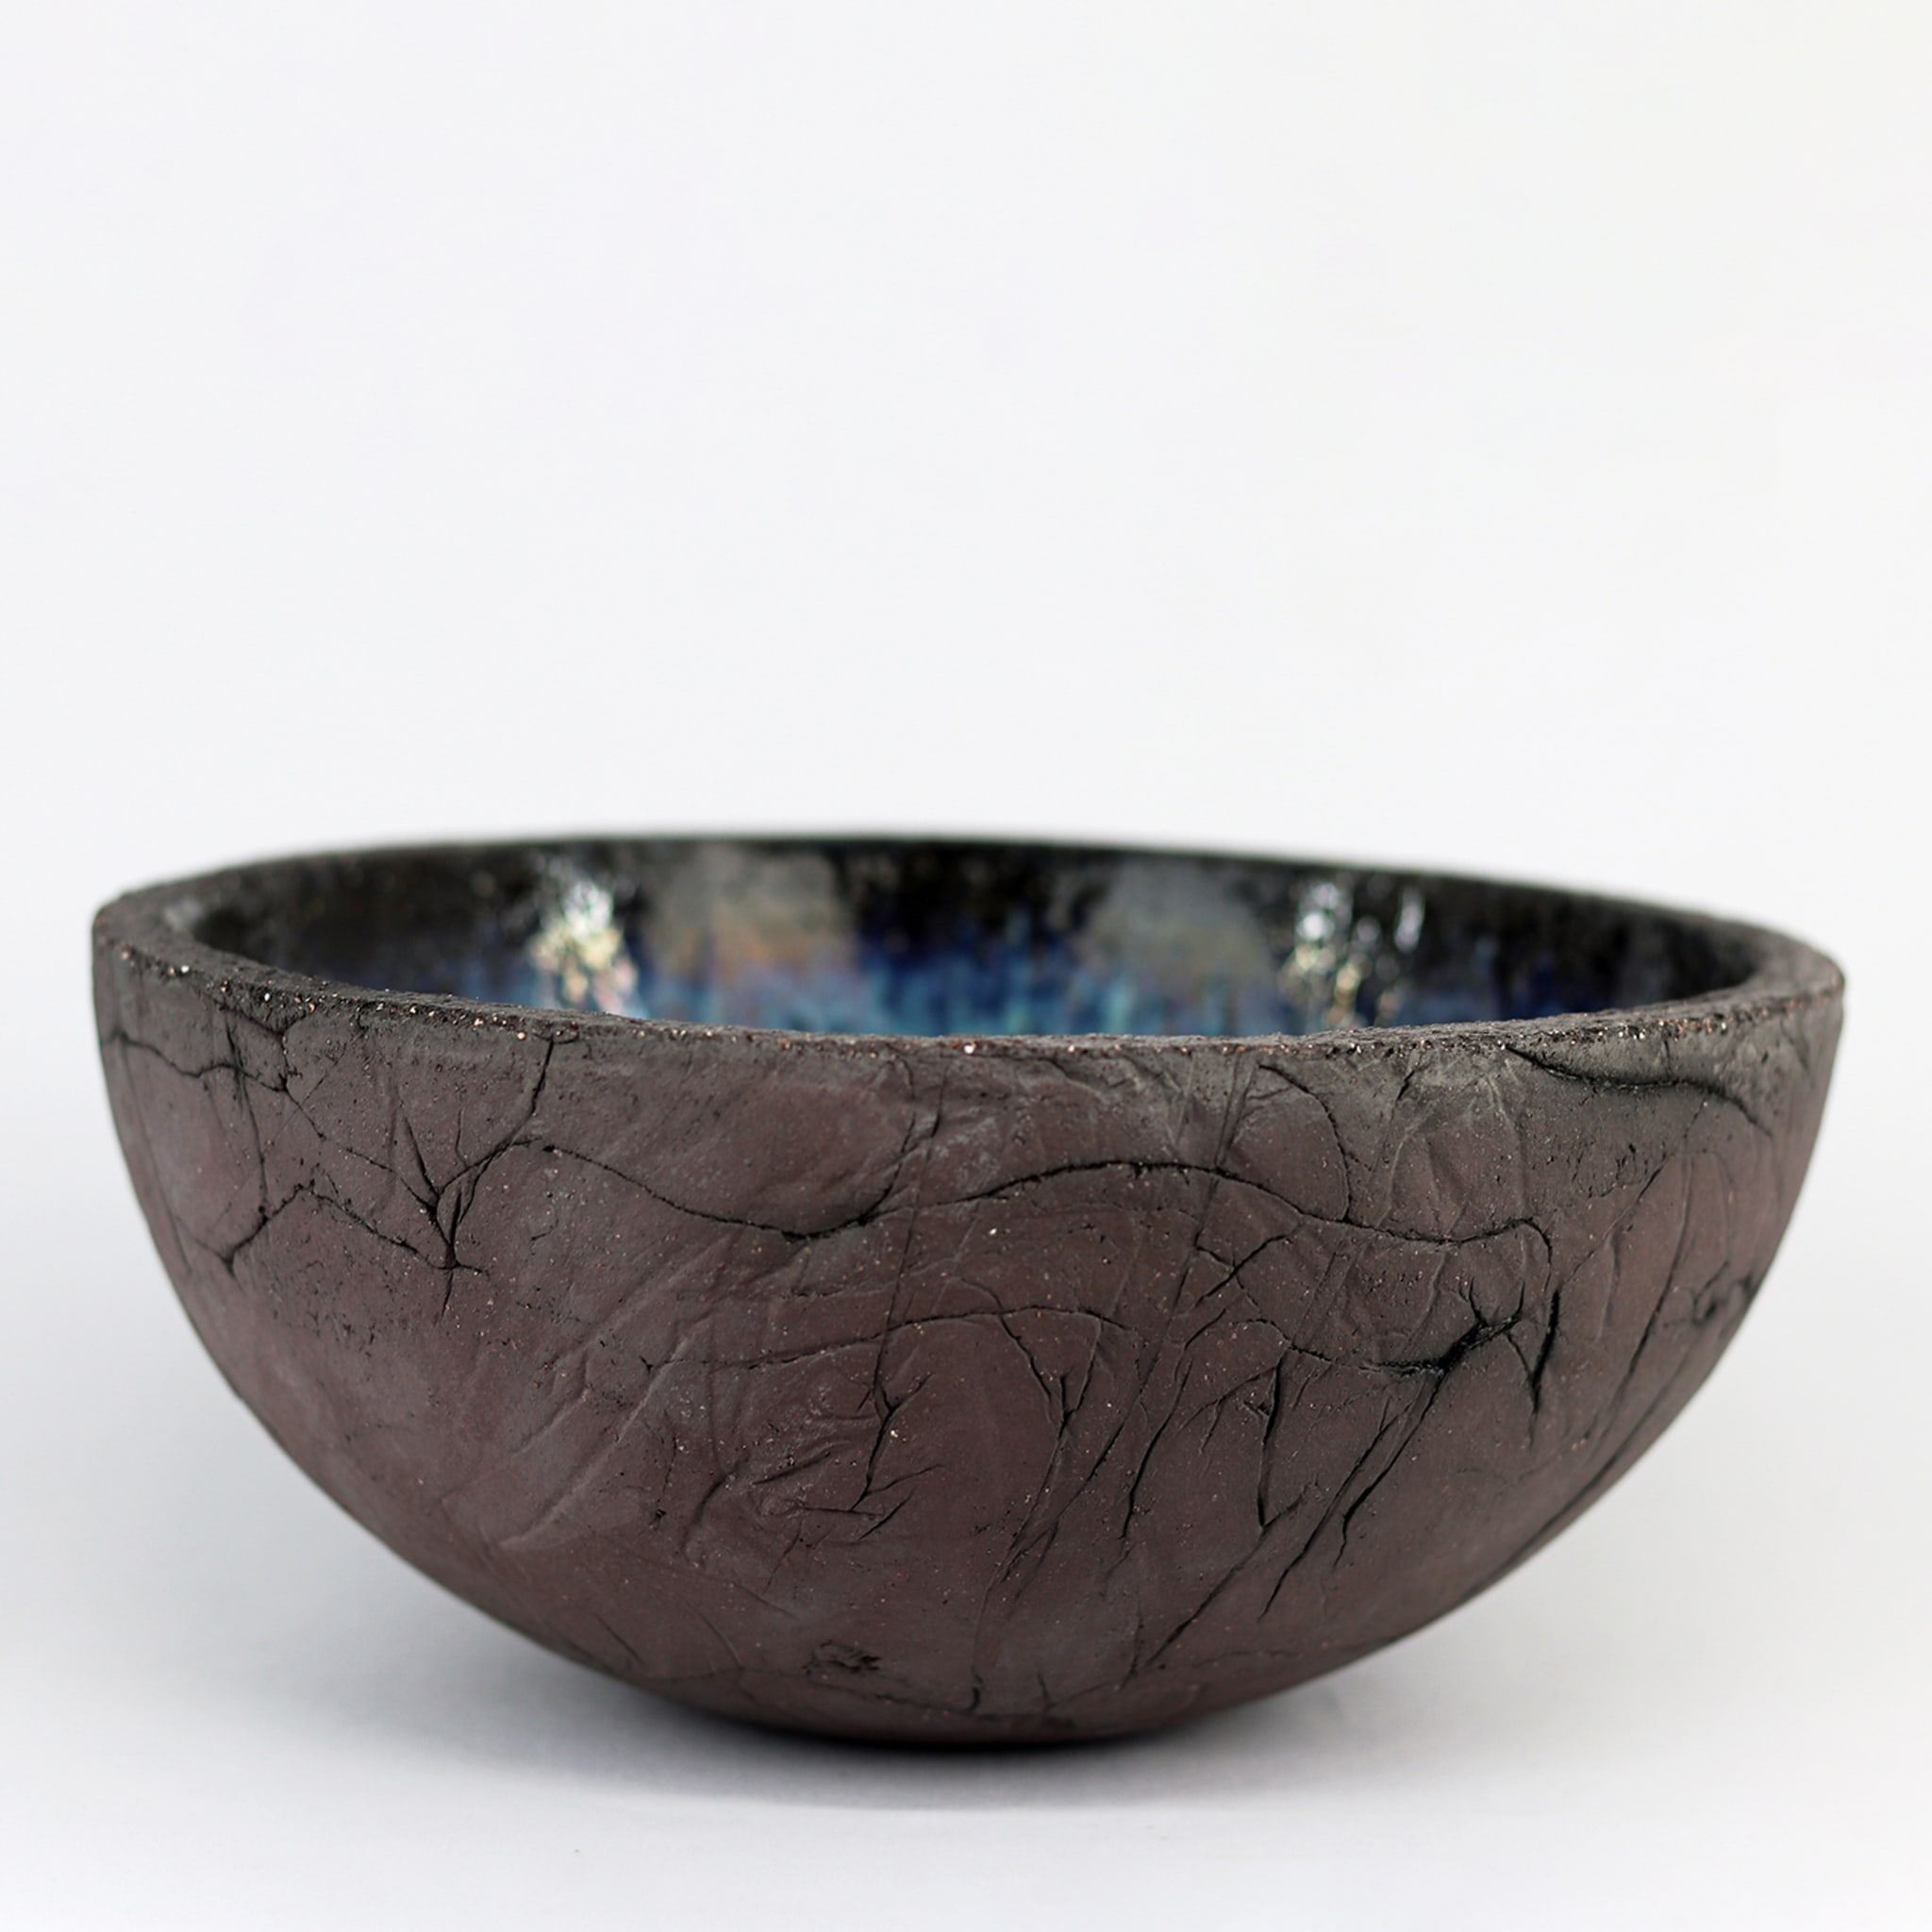 Turquoise and Black Bowl - Alternative view 1